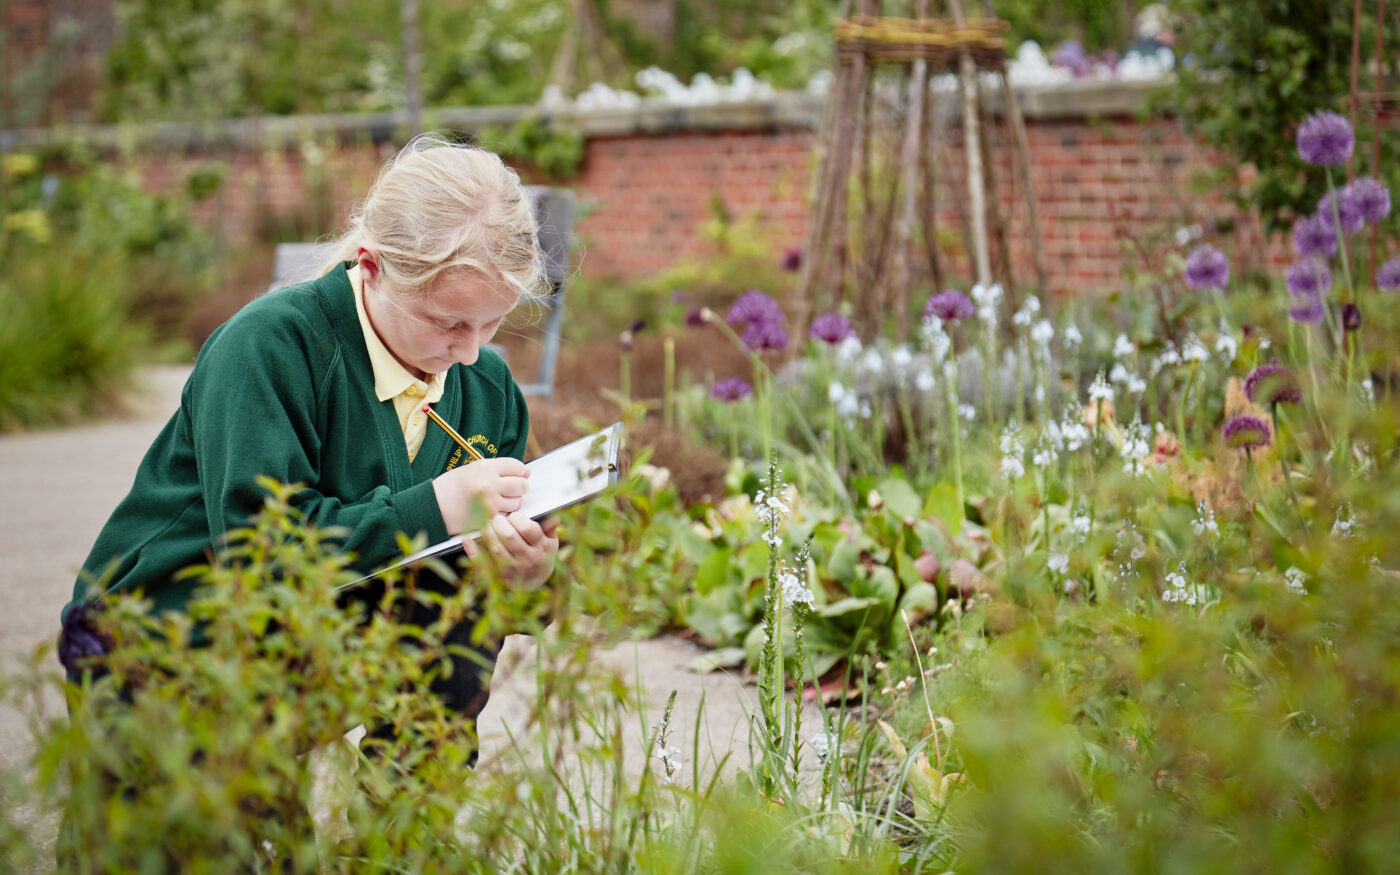 A school student among flowers in a garden writing on a clipboard